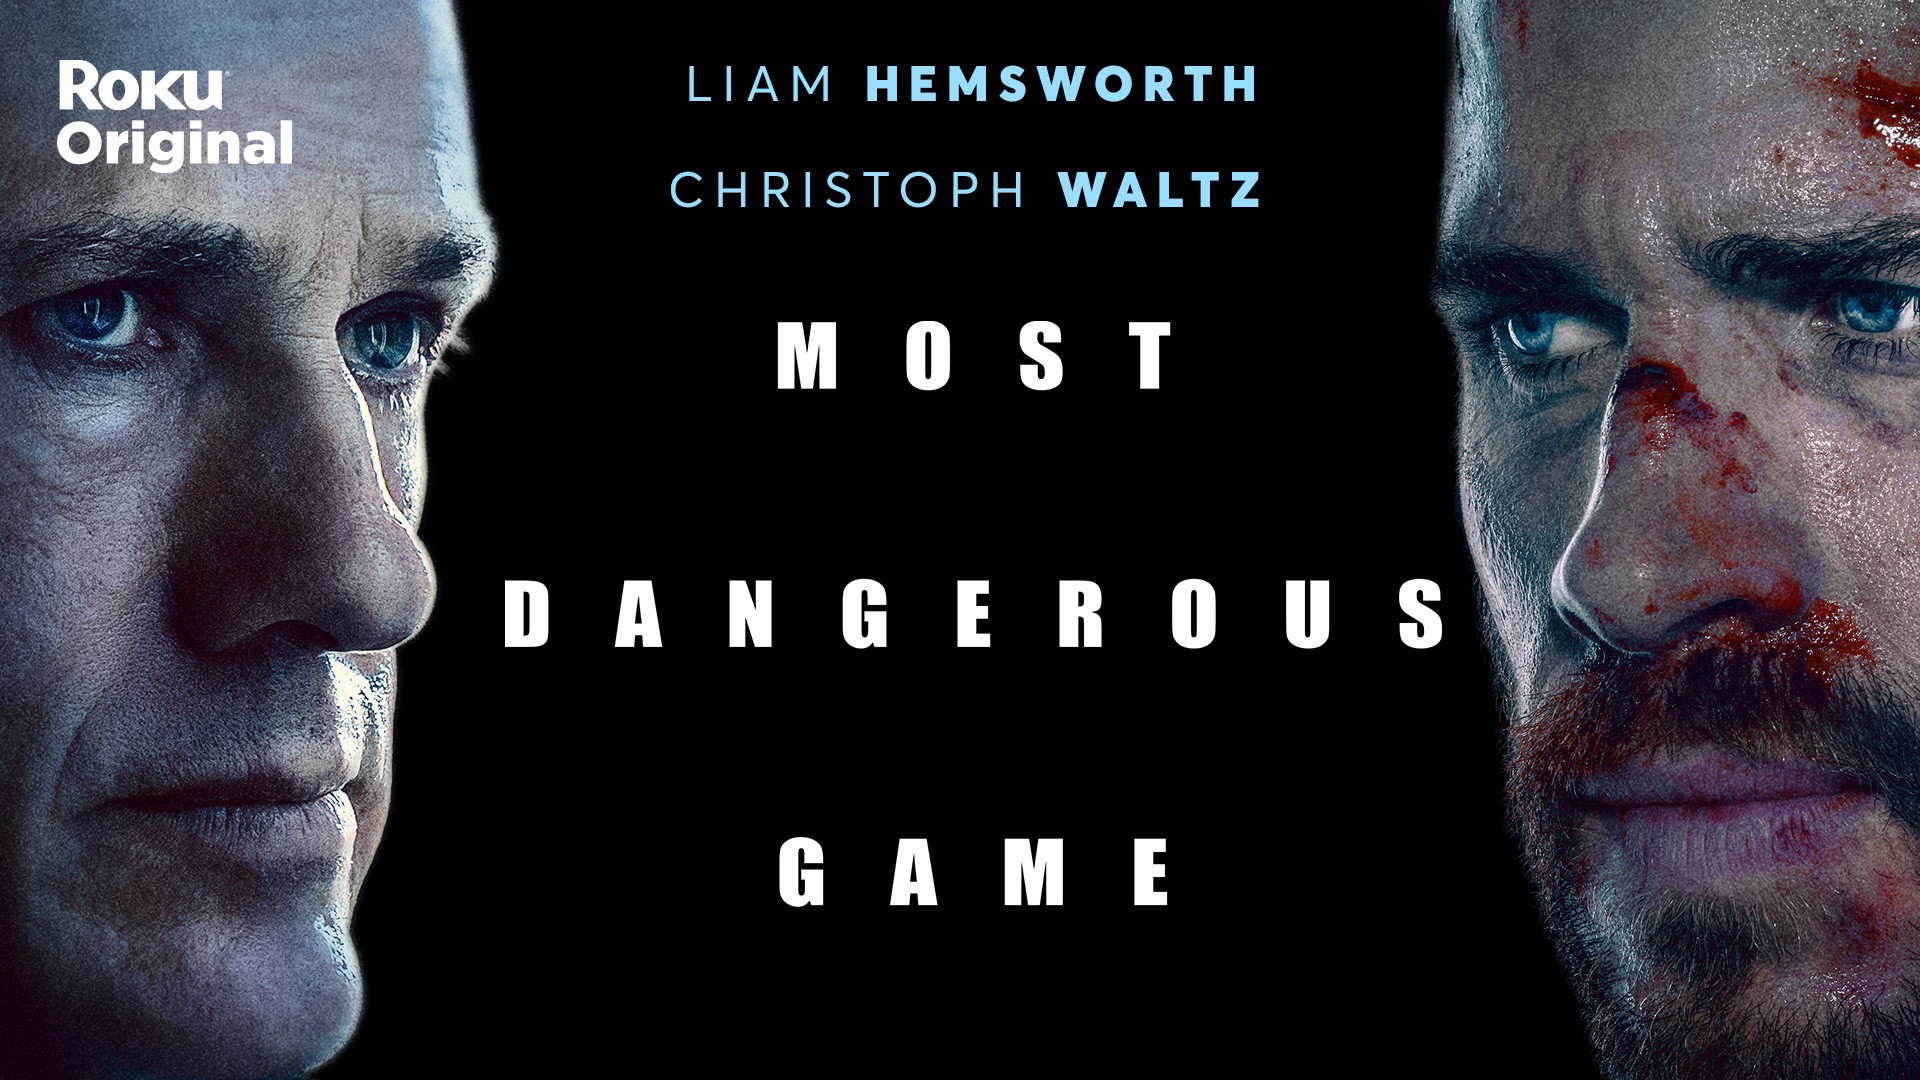 the most dangerous game free